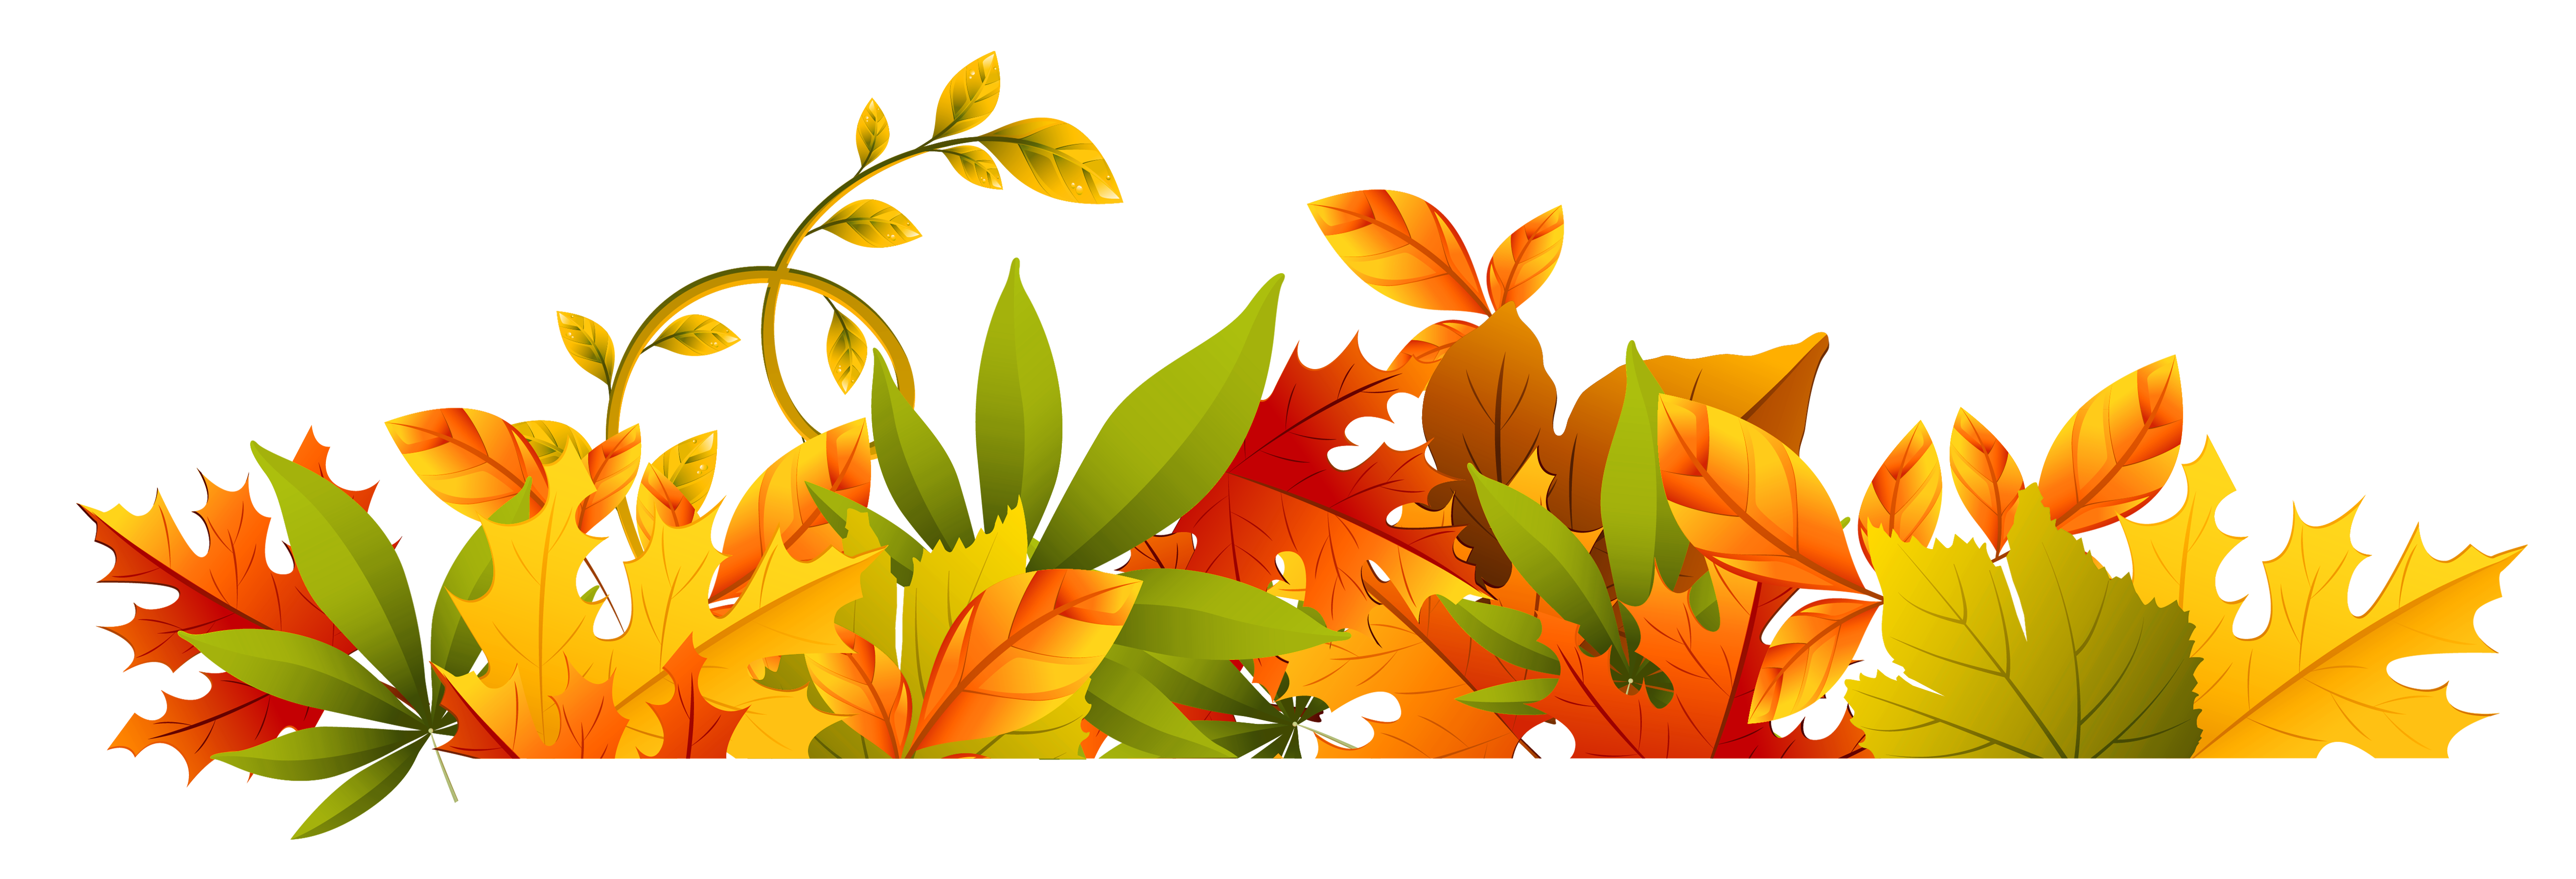 Free clipart of tree leaves and borders